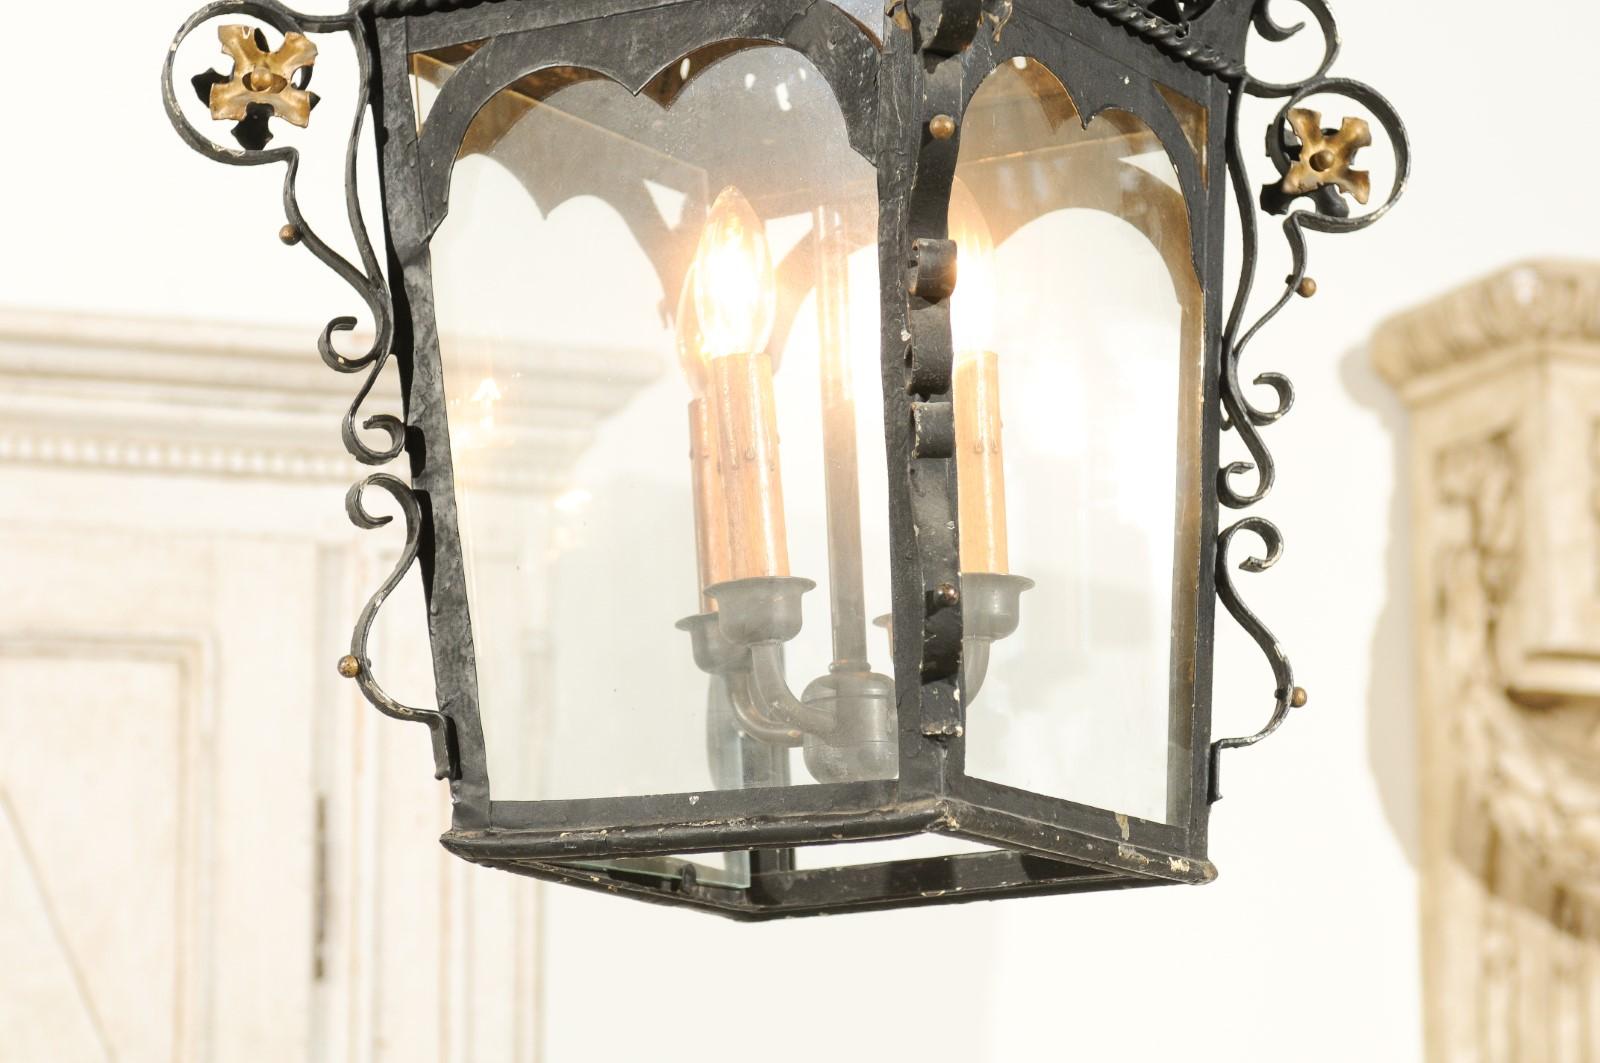 Glass Swedish 1890s Black Iron Three-Arm Lantern with Gilt Floral Accents and Scrolls